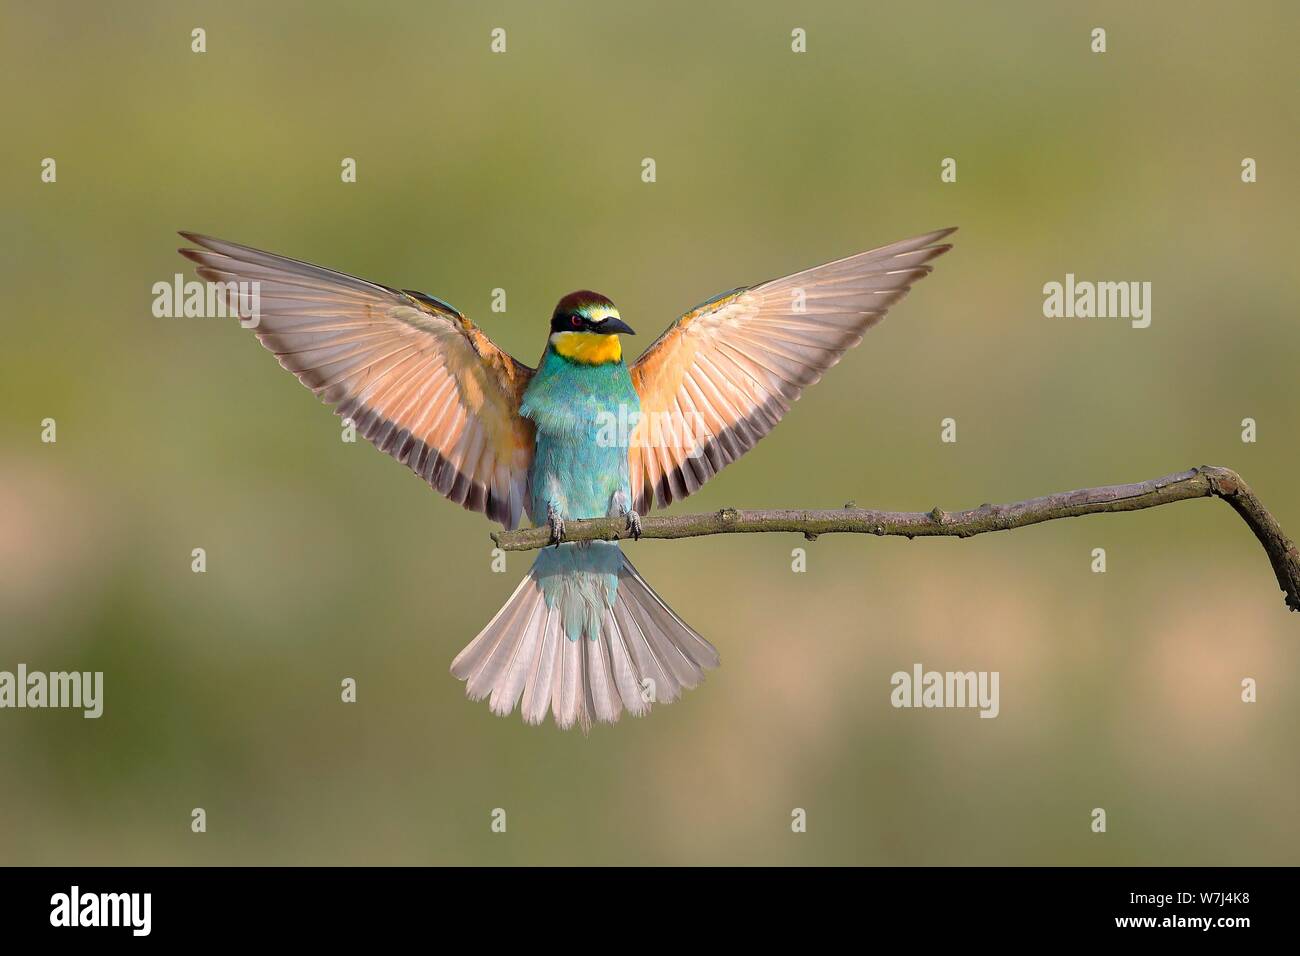 Bee-eater (Merops apiaster) approaching a branch with spread out wings, National Park Lake Neusiedl, Burgenland, Austria Stock Photo